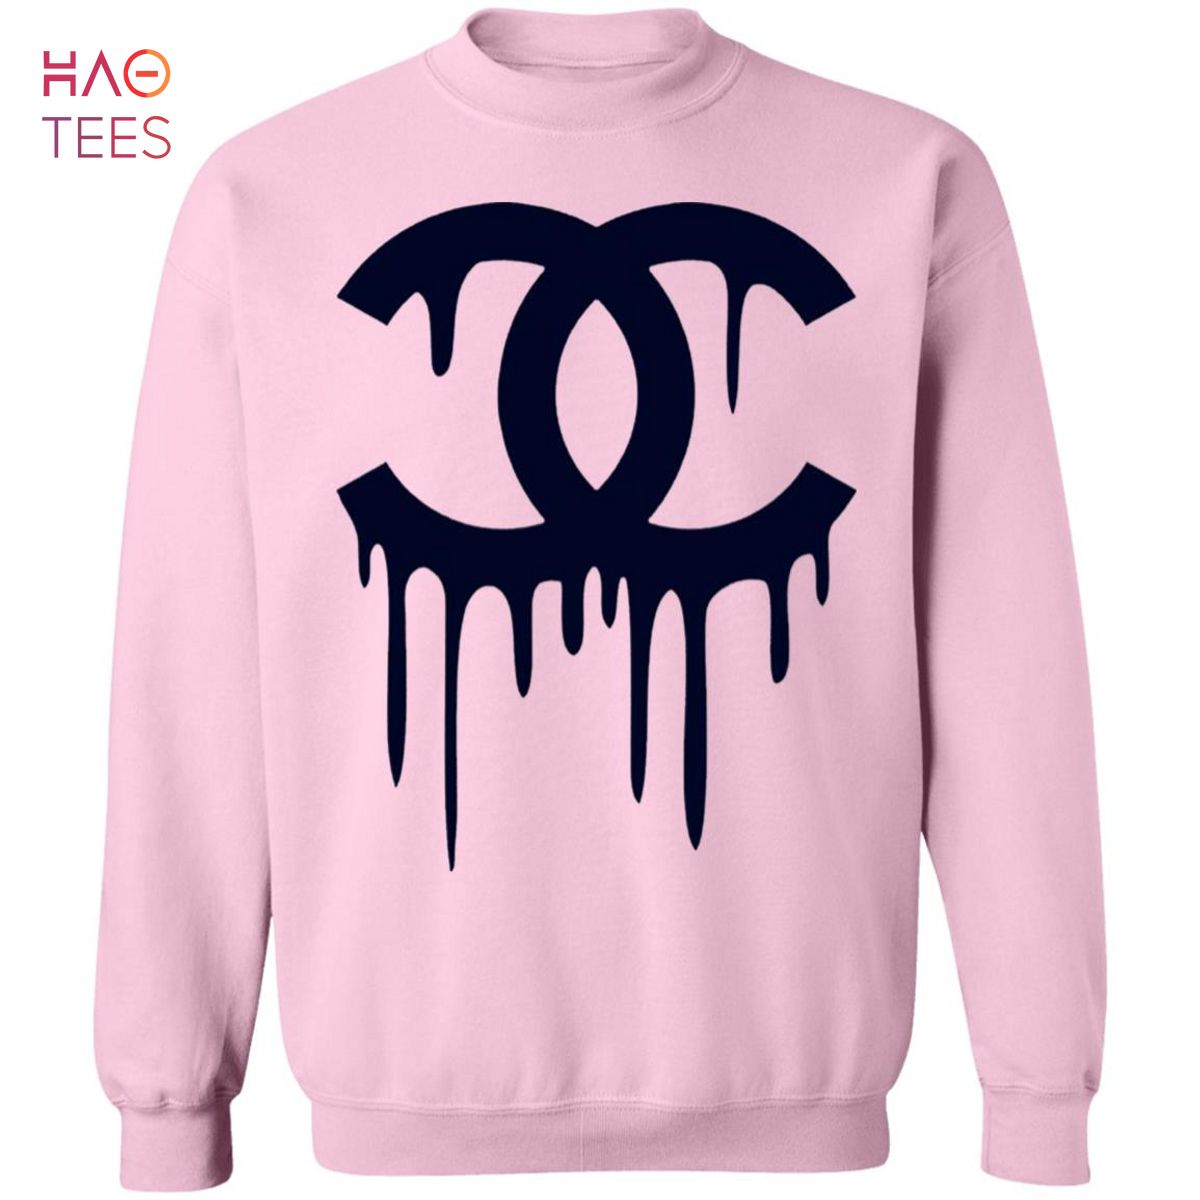 HOT Chanel Sweater Slime